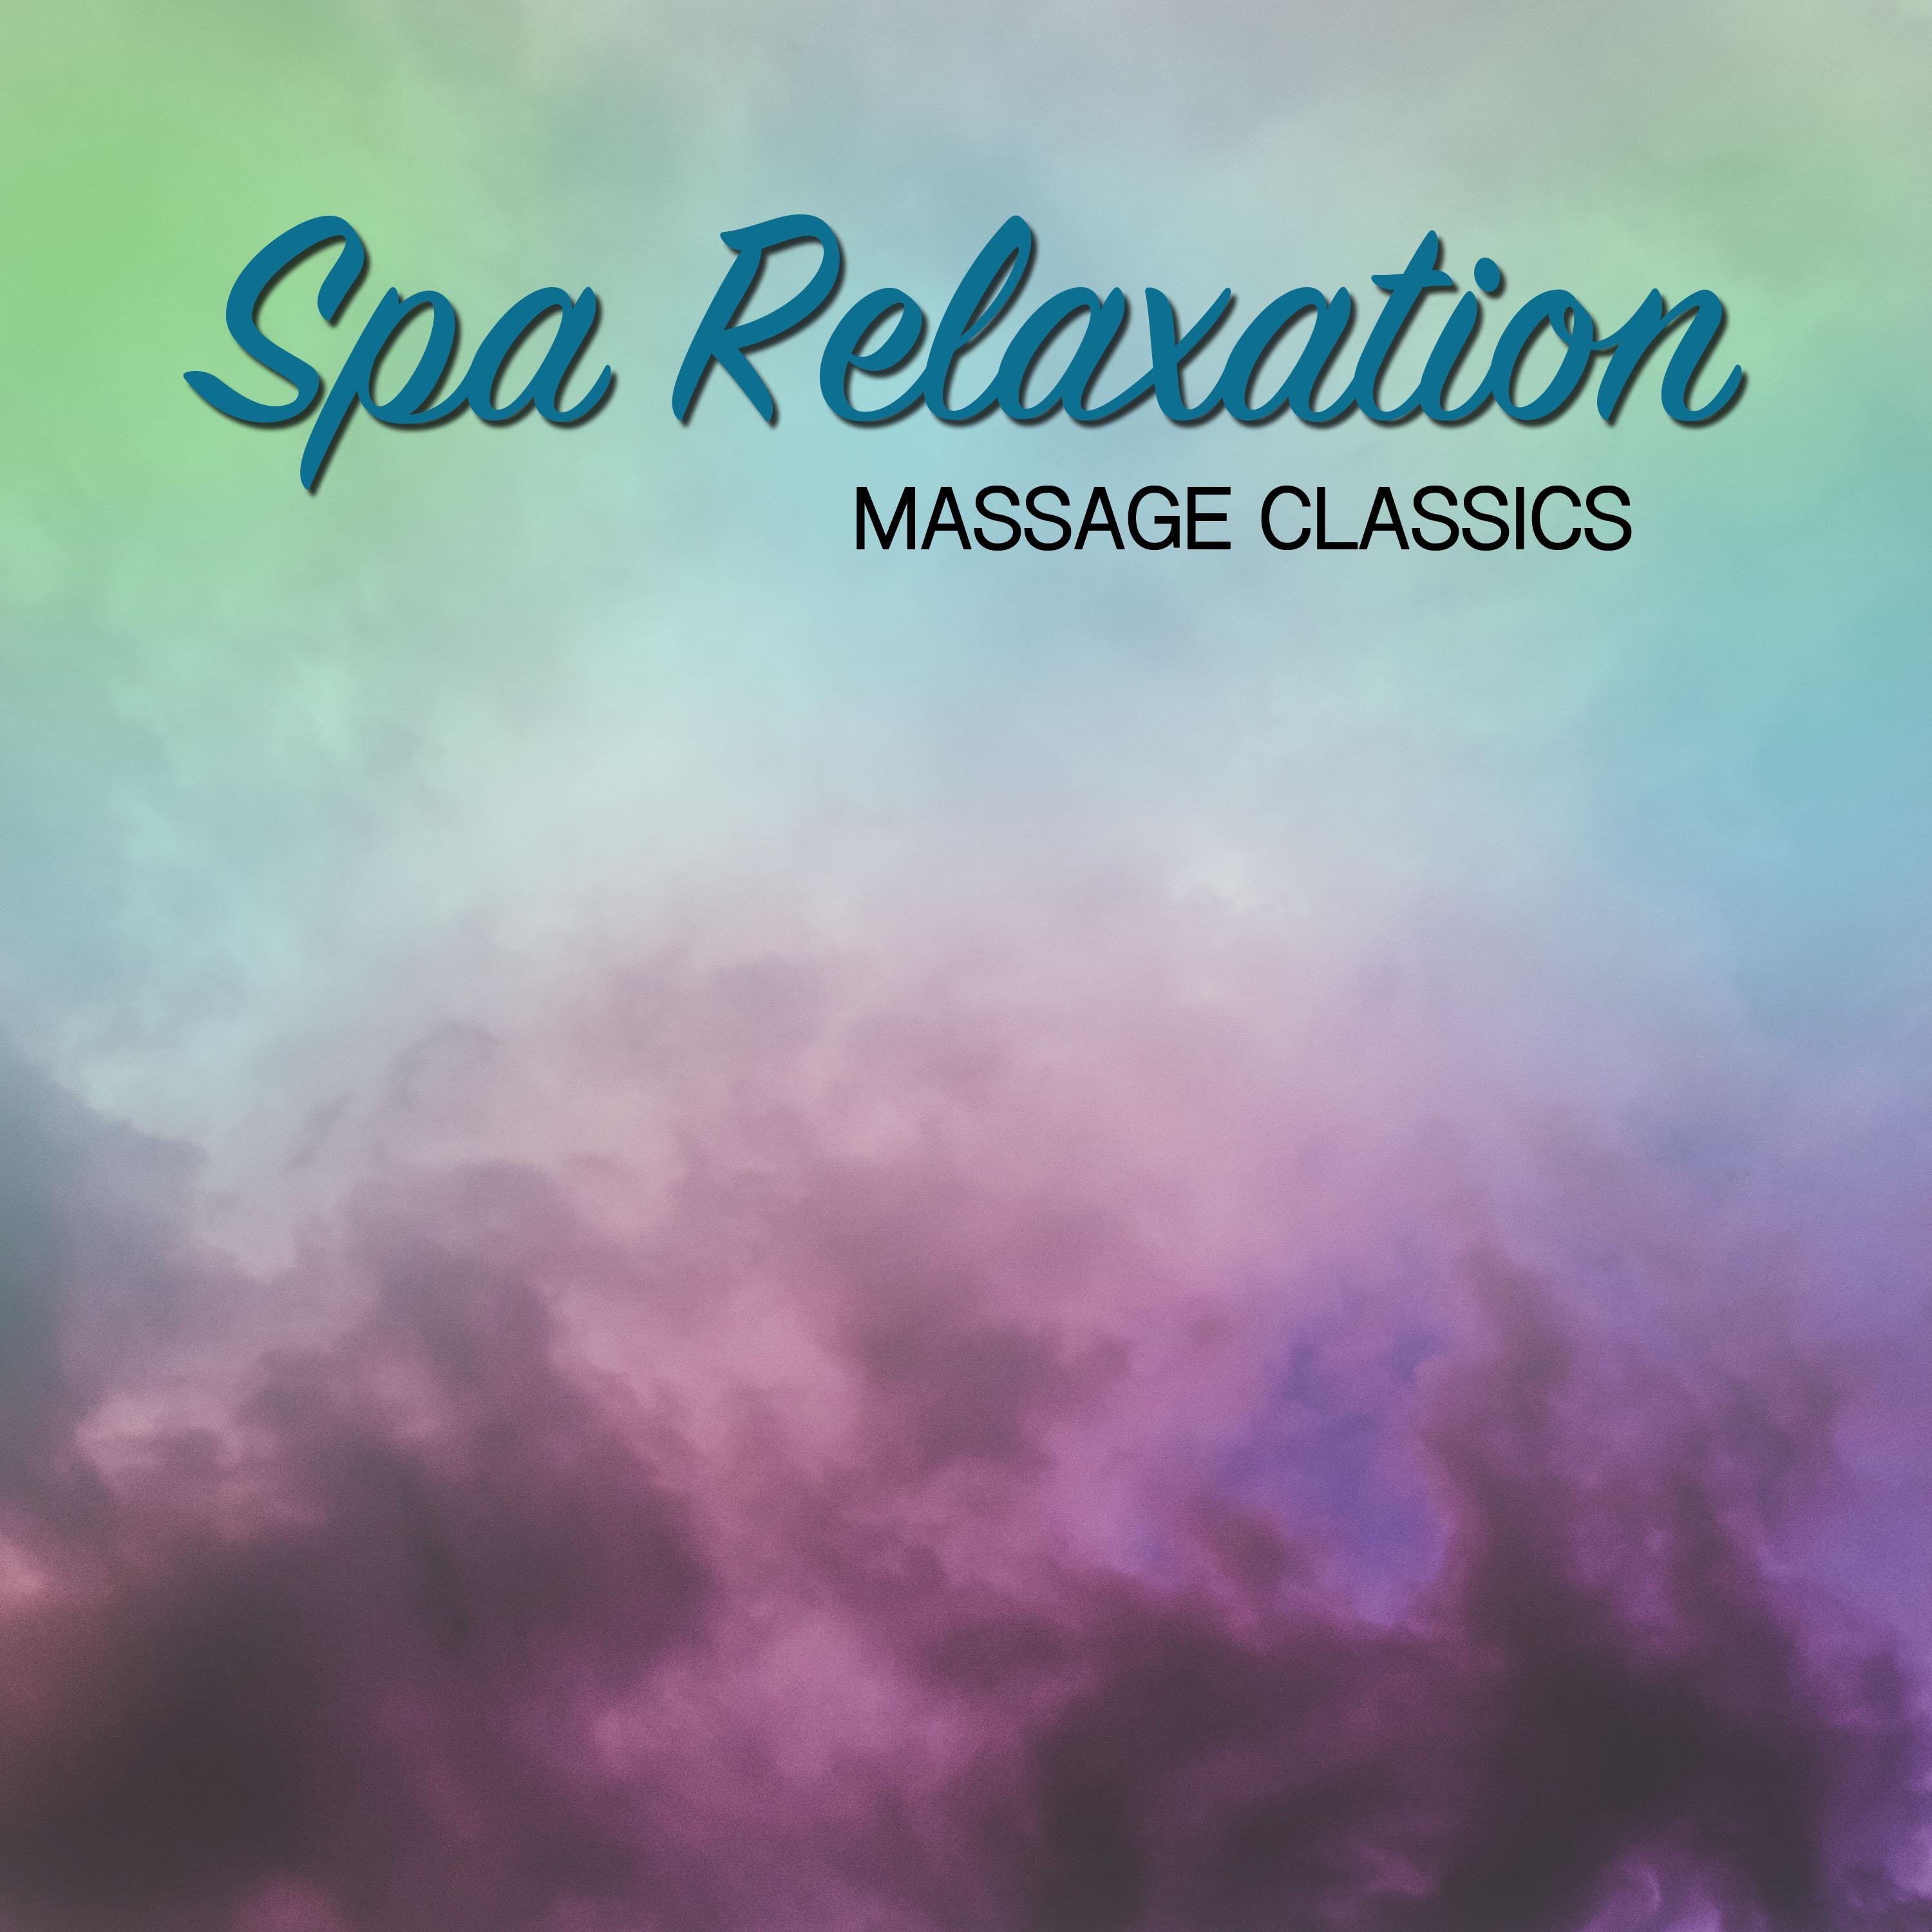 15 Spa Relaxation and Massage Classics